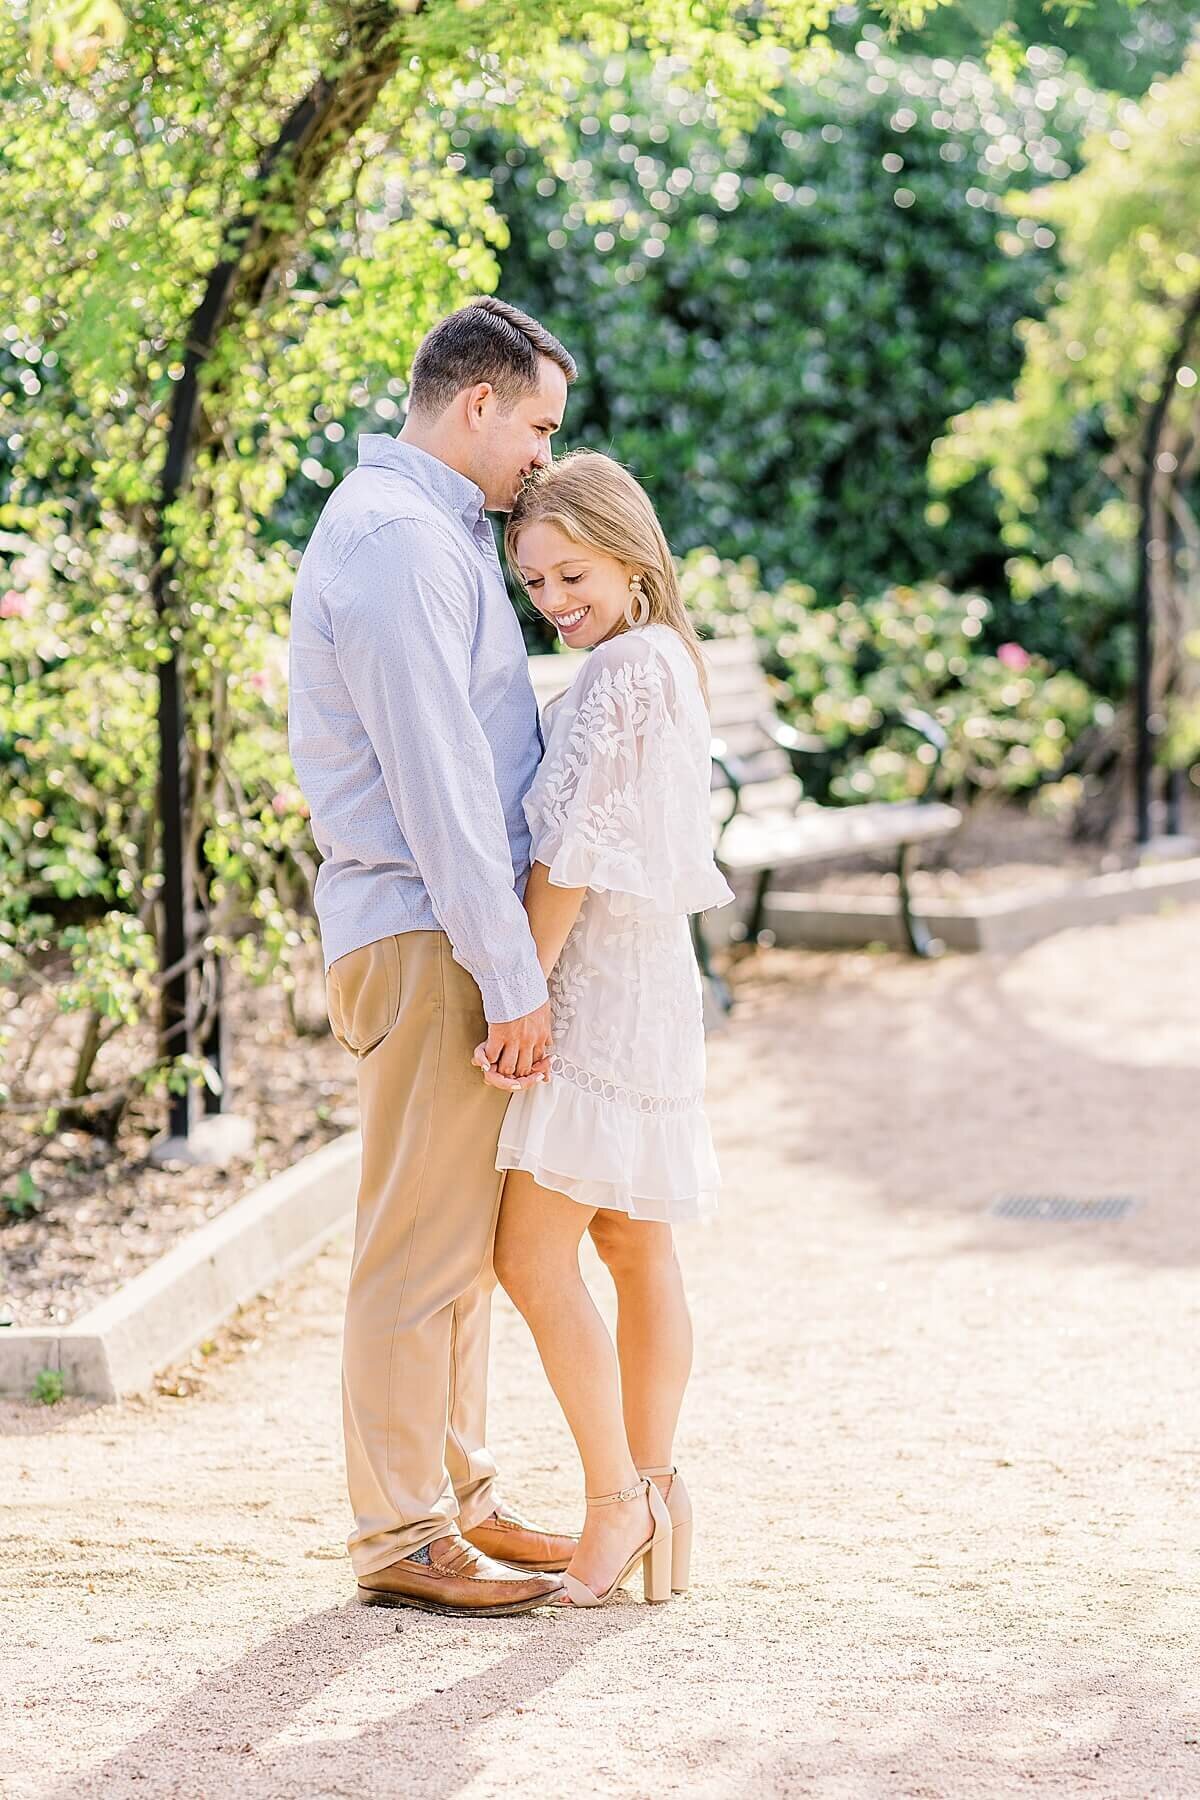 McGovern-Centennial-Gardens-Hermann-Park-Engagement-Session-Alicia-Yarrish-Photography_0040